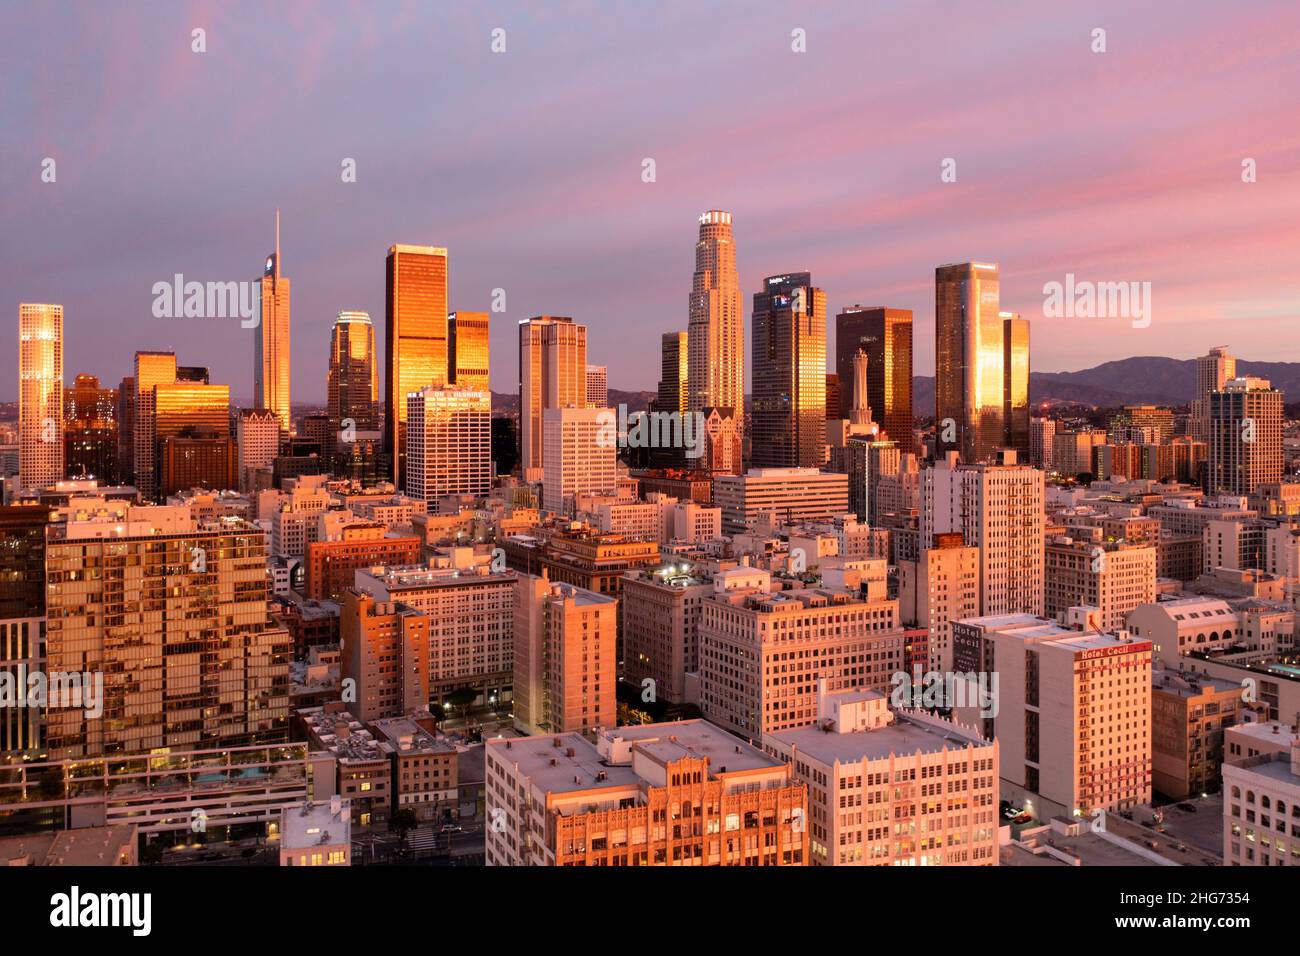 Aerial view of an amazing pink and gold sunrise reflected in the towers of downtown Los Angeles Stock Photo